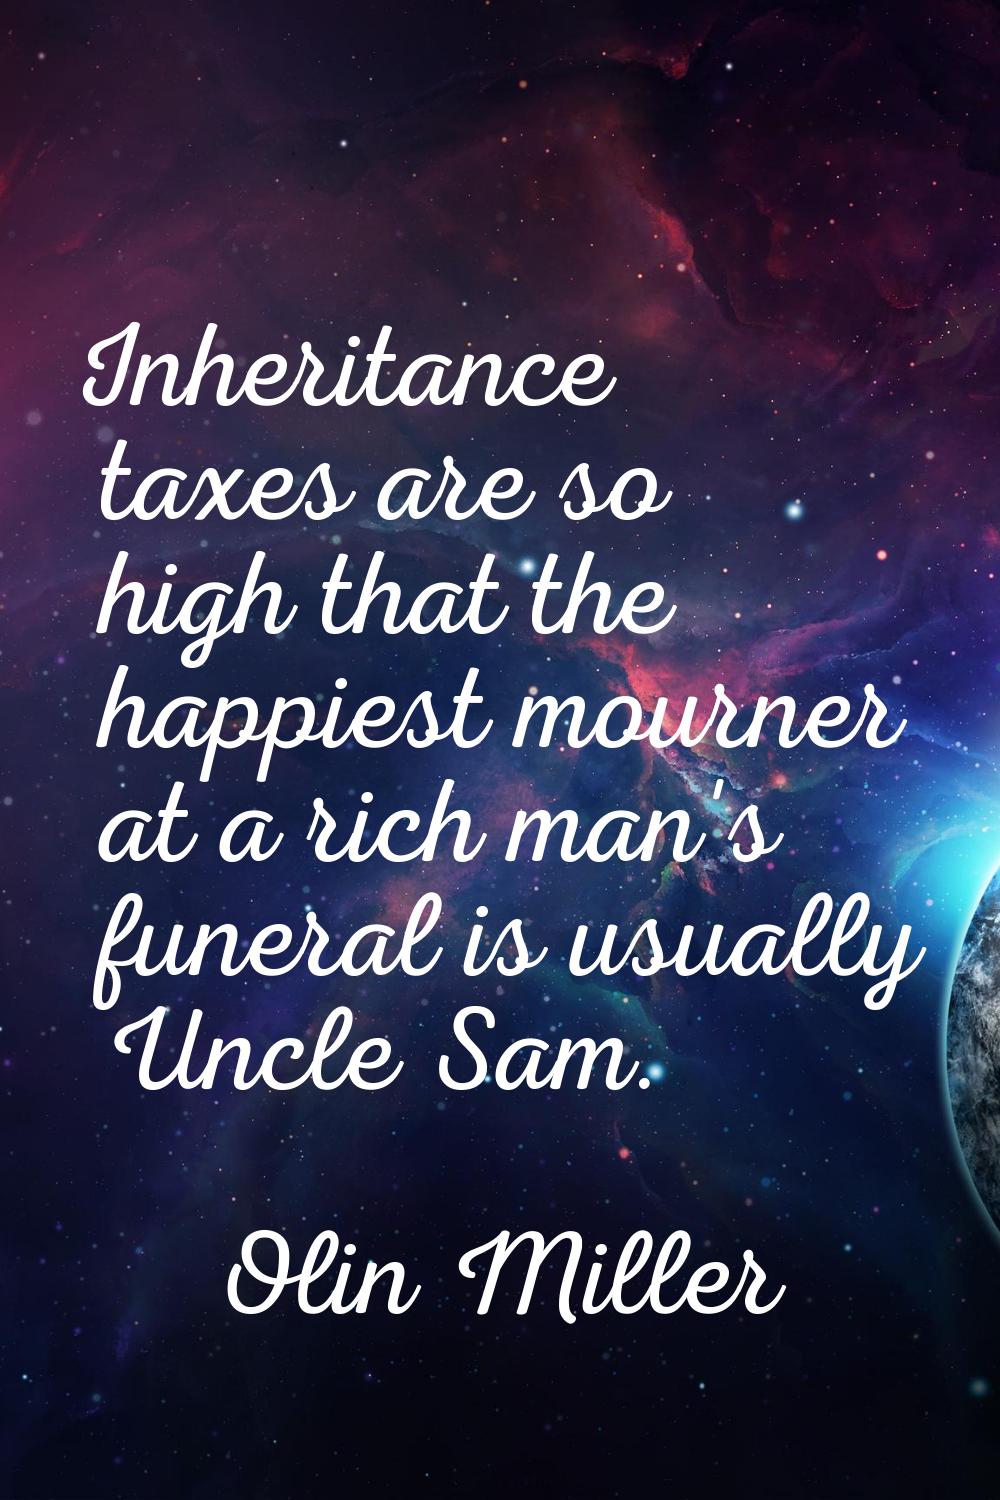 Inheritance taxes are so high that the happiest mourner at a rich man's funeral is usually Uncle Sa